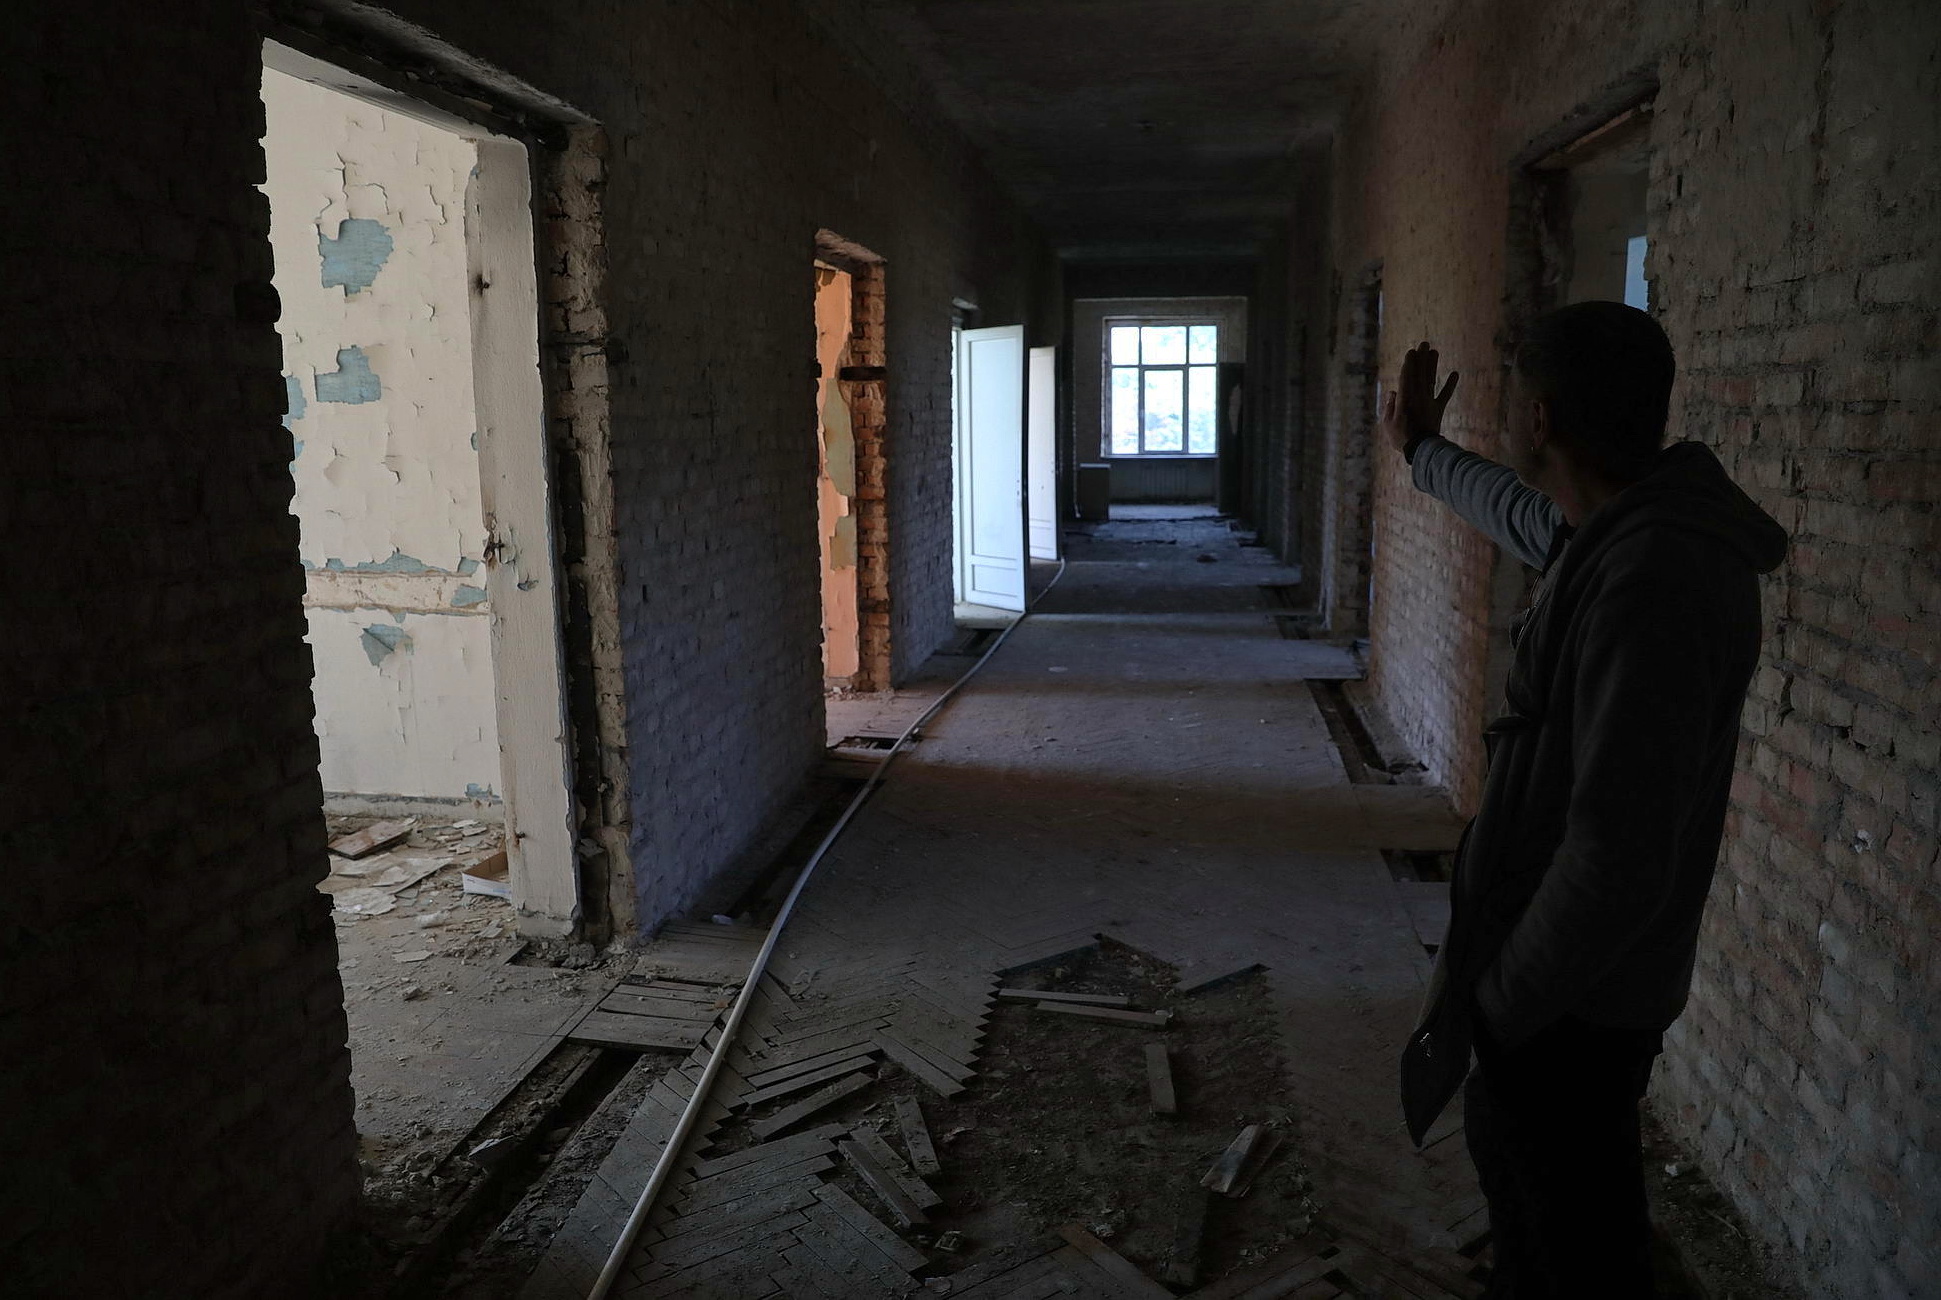 An employee of the Trade Unions House in Odesa shows the results of fire there on May 13, 2019. The 42 people were killed there by fire on May 2, 2014.